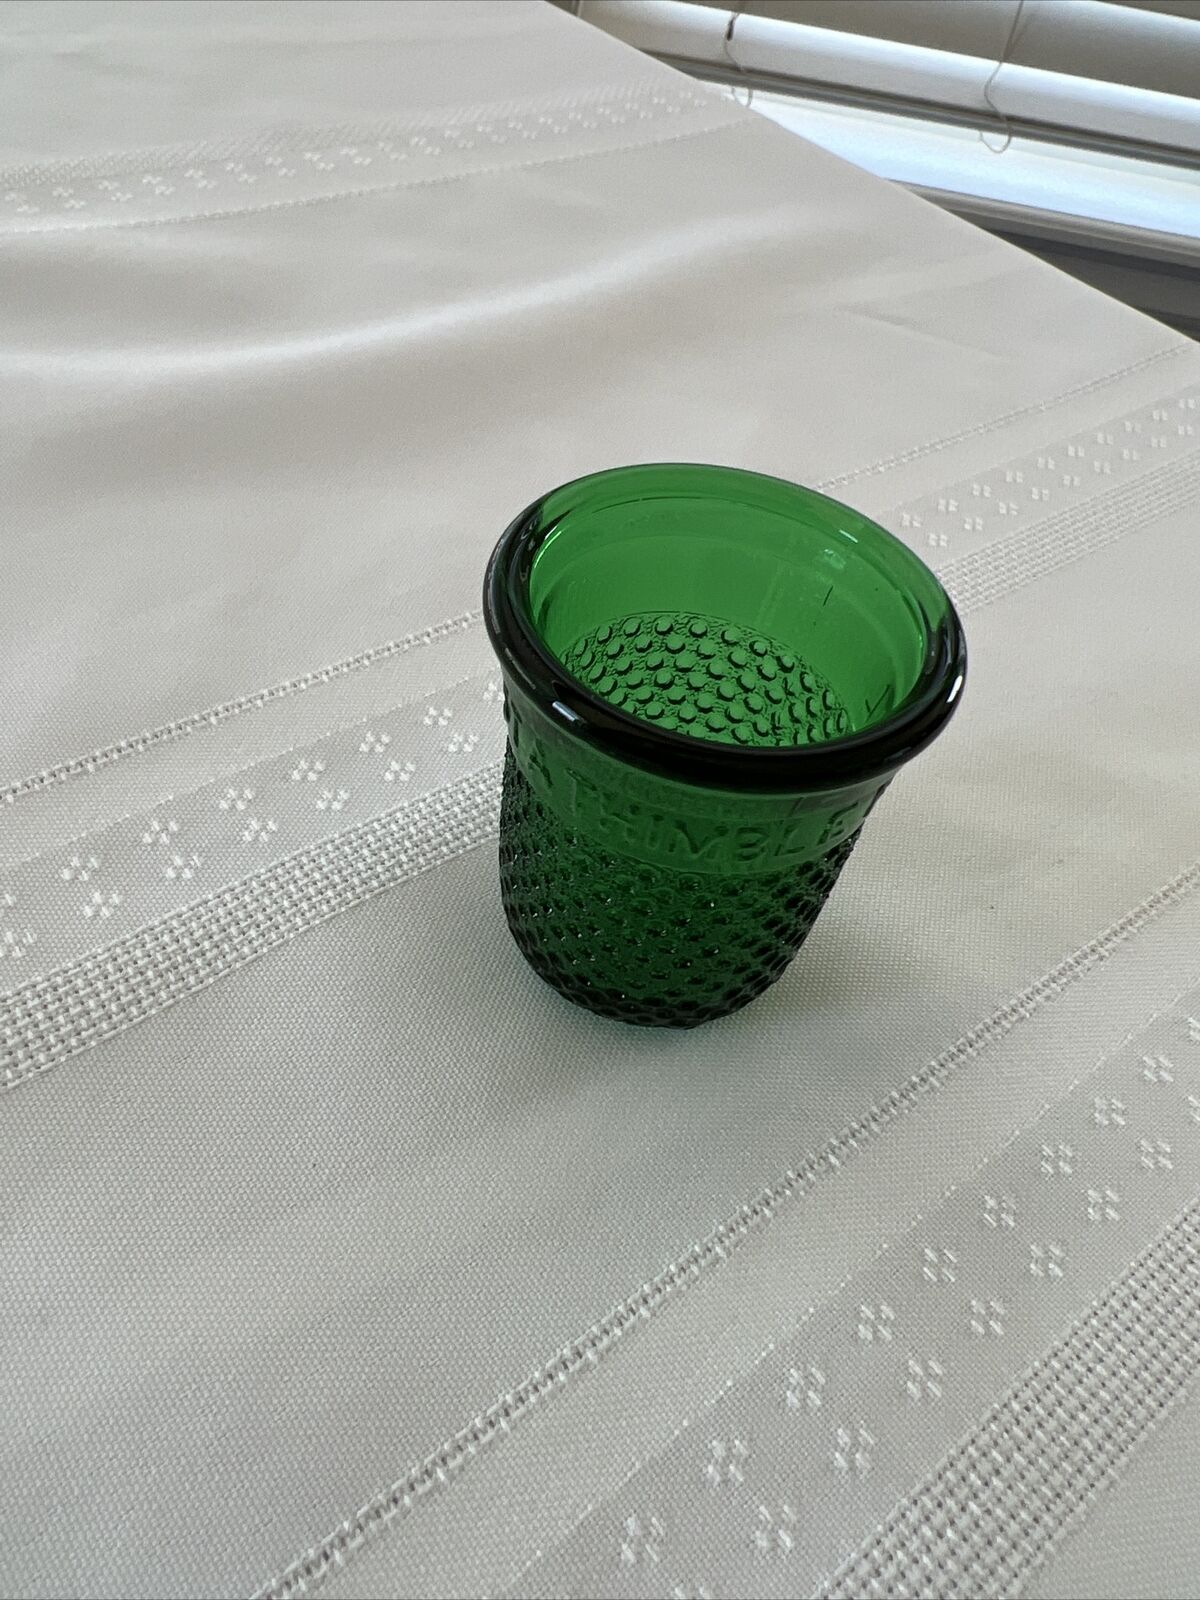 ANTIQUE VINTAGE GREEN SHOTGLASS “JUST A THIMBLE FULL” SEWING COLLECTABLE